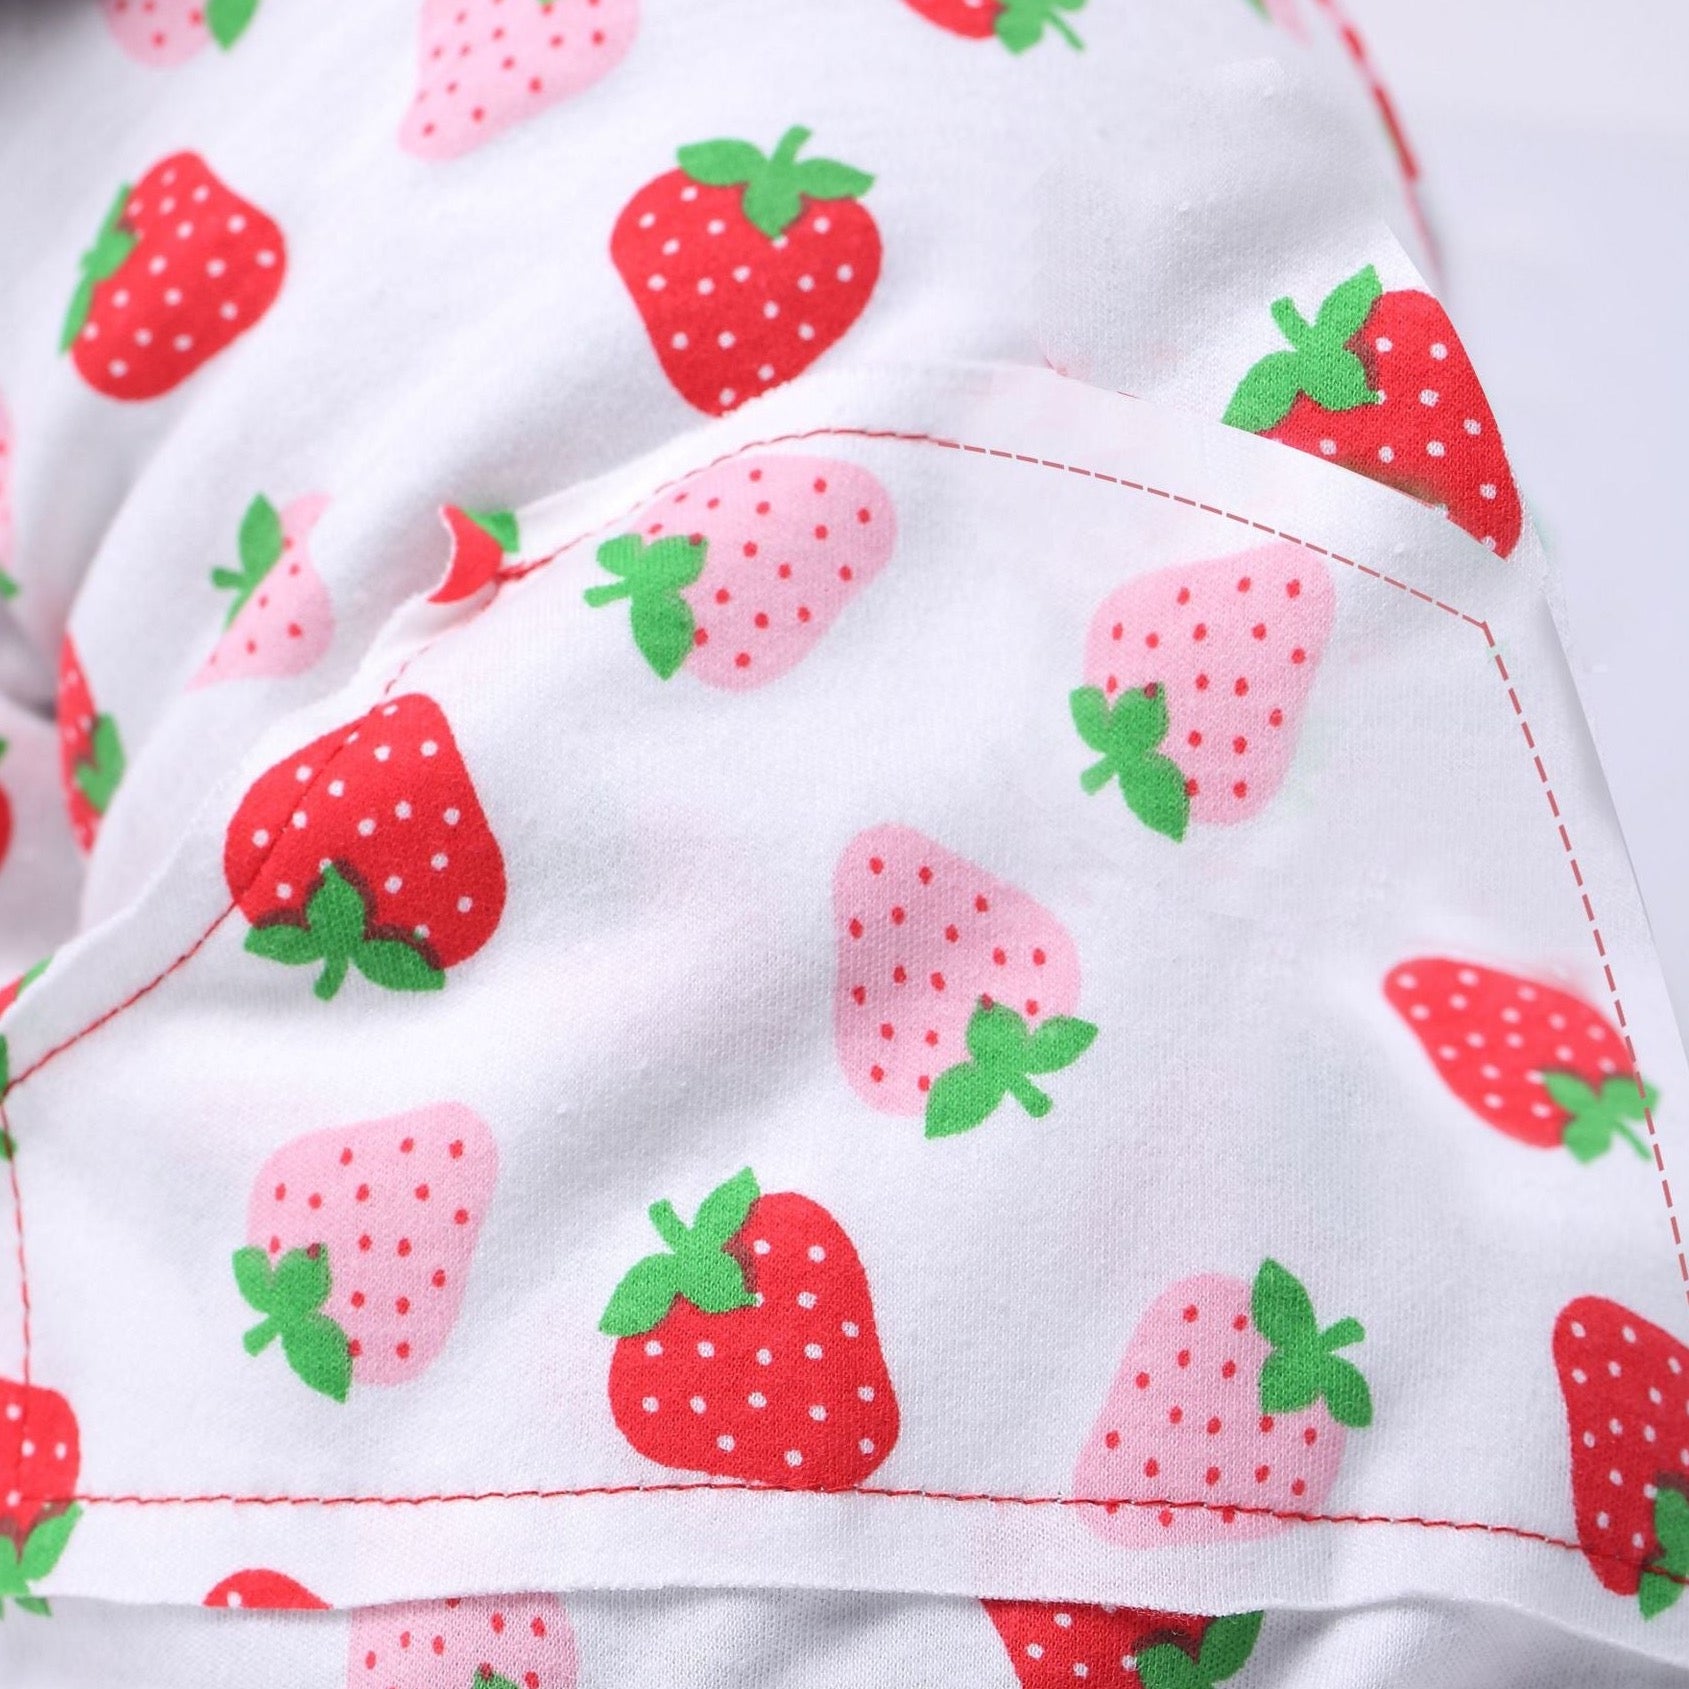 Red and pink polka-dot strawberries on white fabric